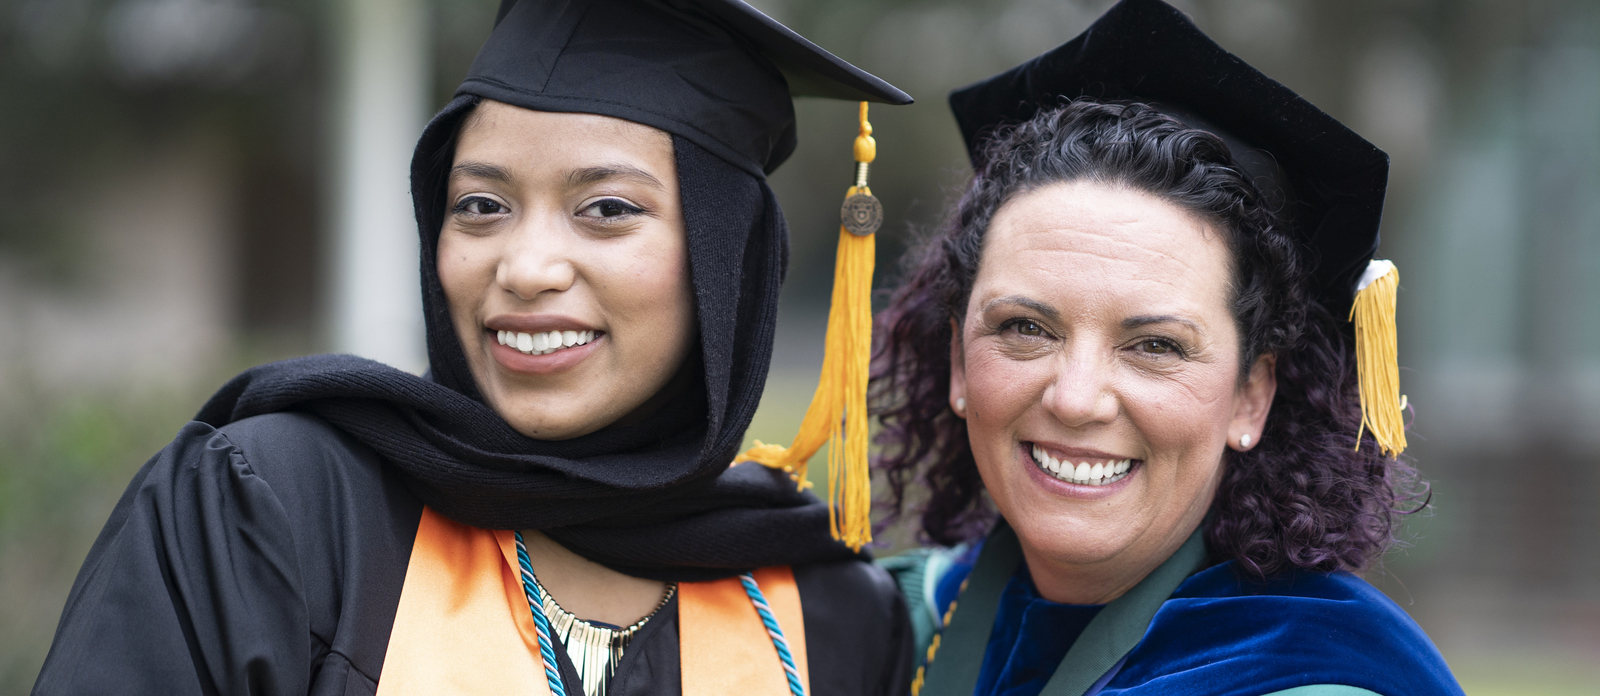 A professor and student wearing regalia at commencement.